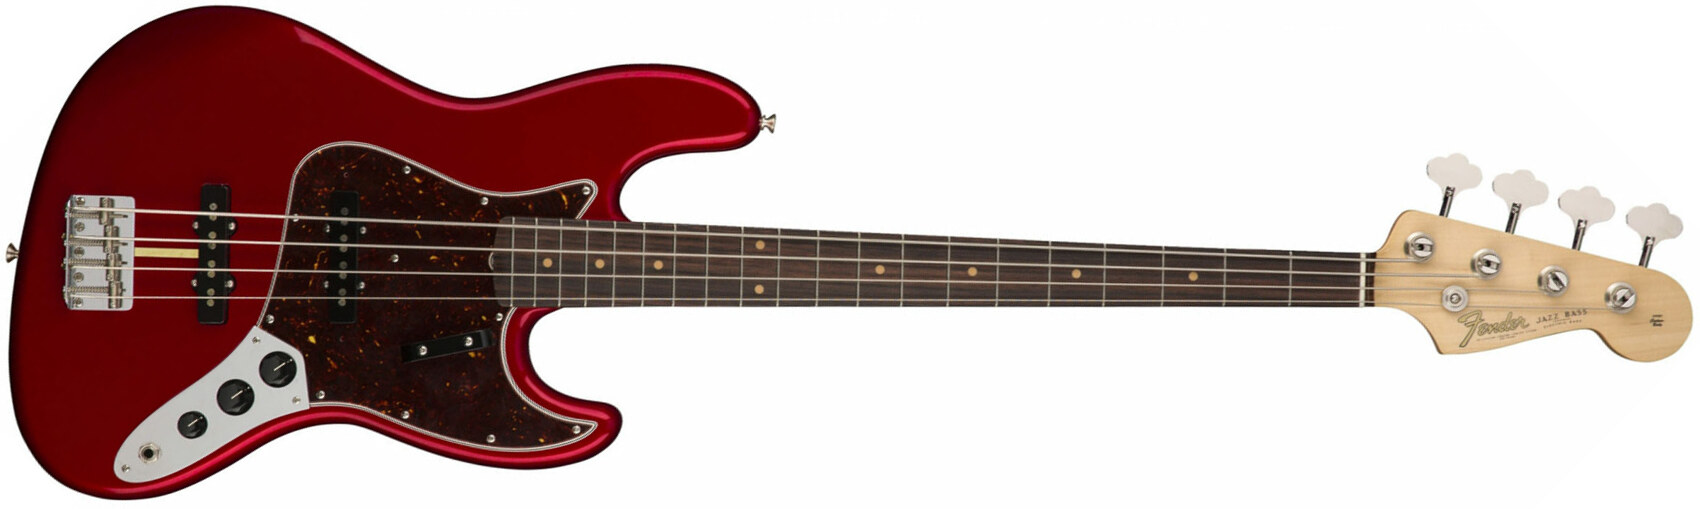 Fender Jazz Bass '60s American Original Usa Rw - Candy Apple Red - Solidbody E-bass - Main picture